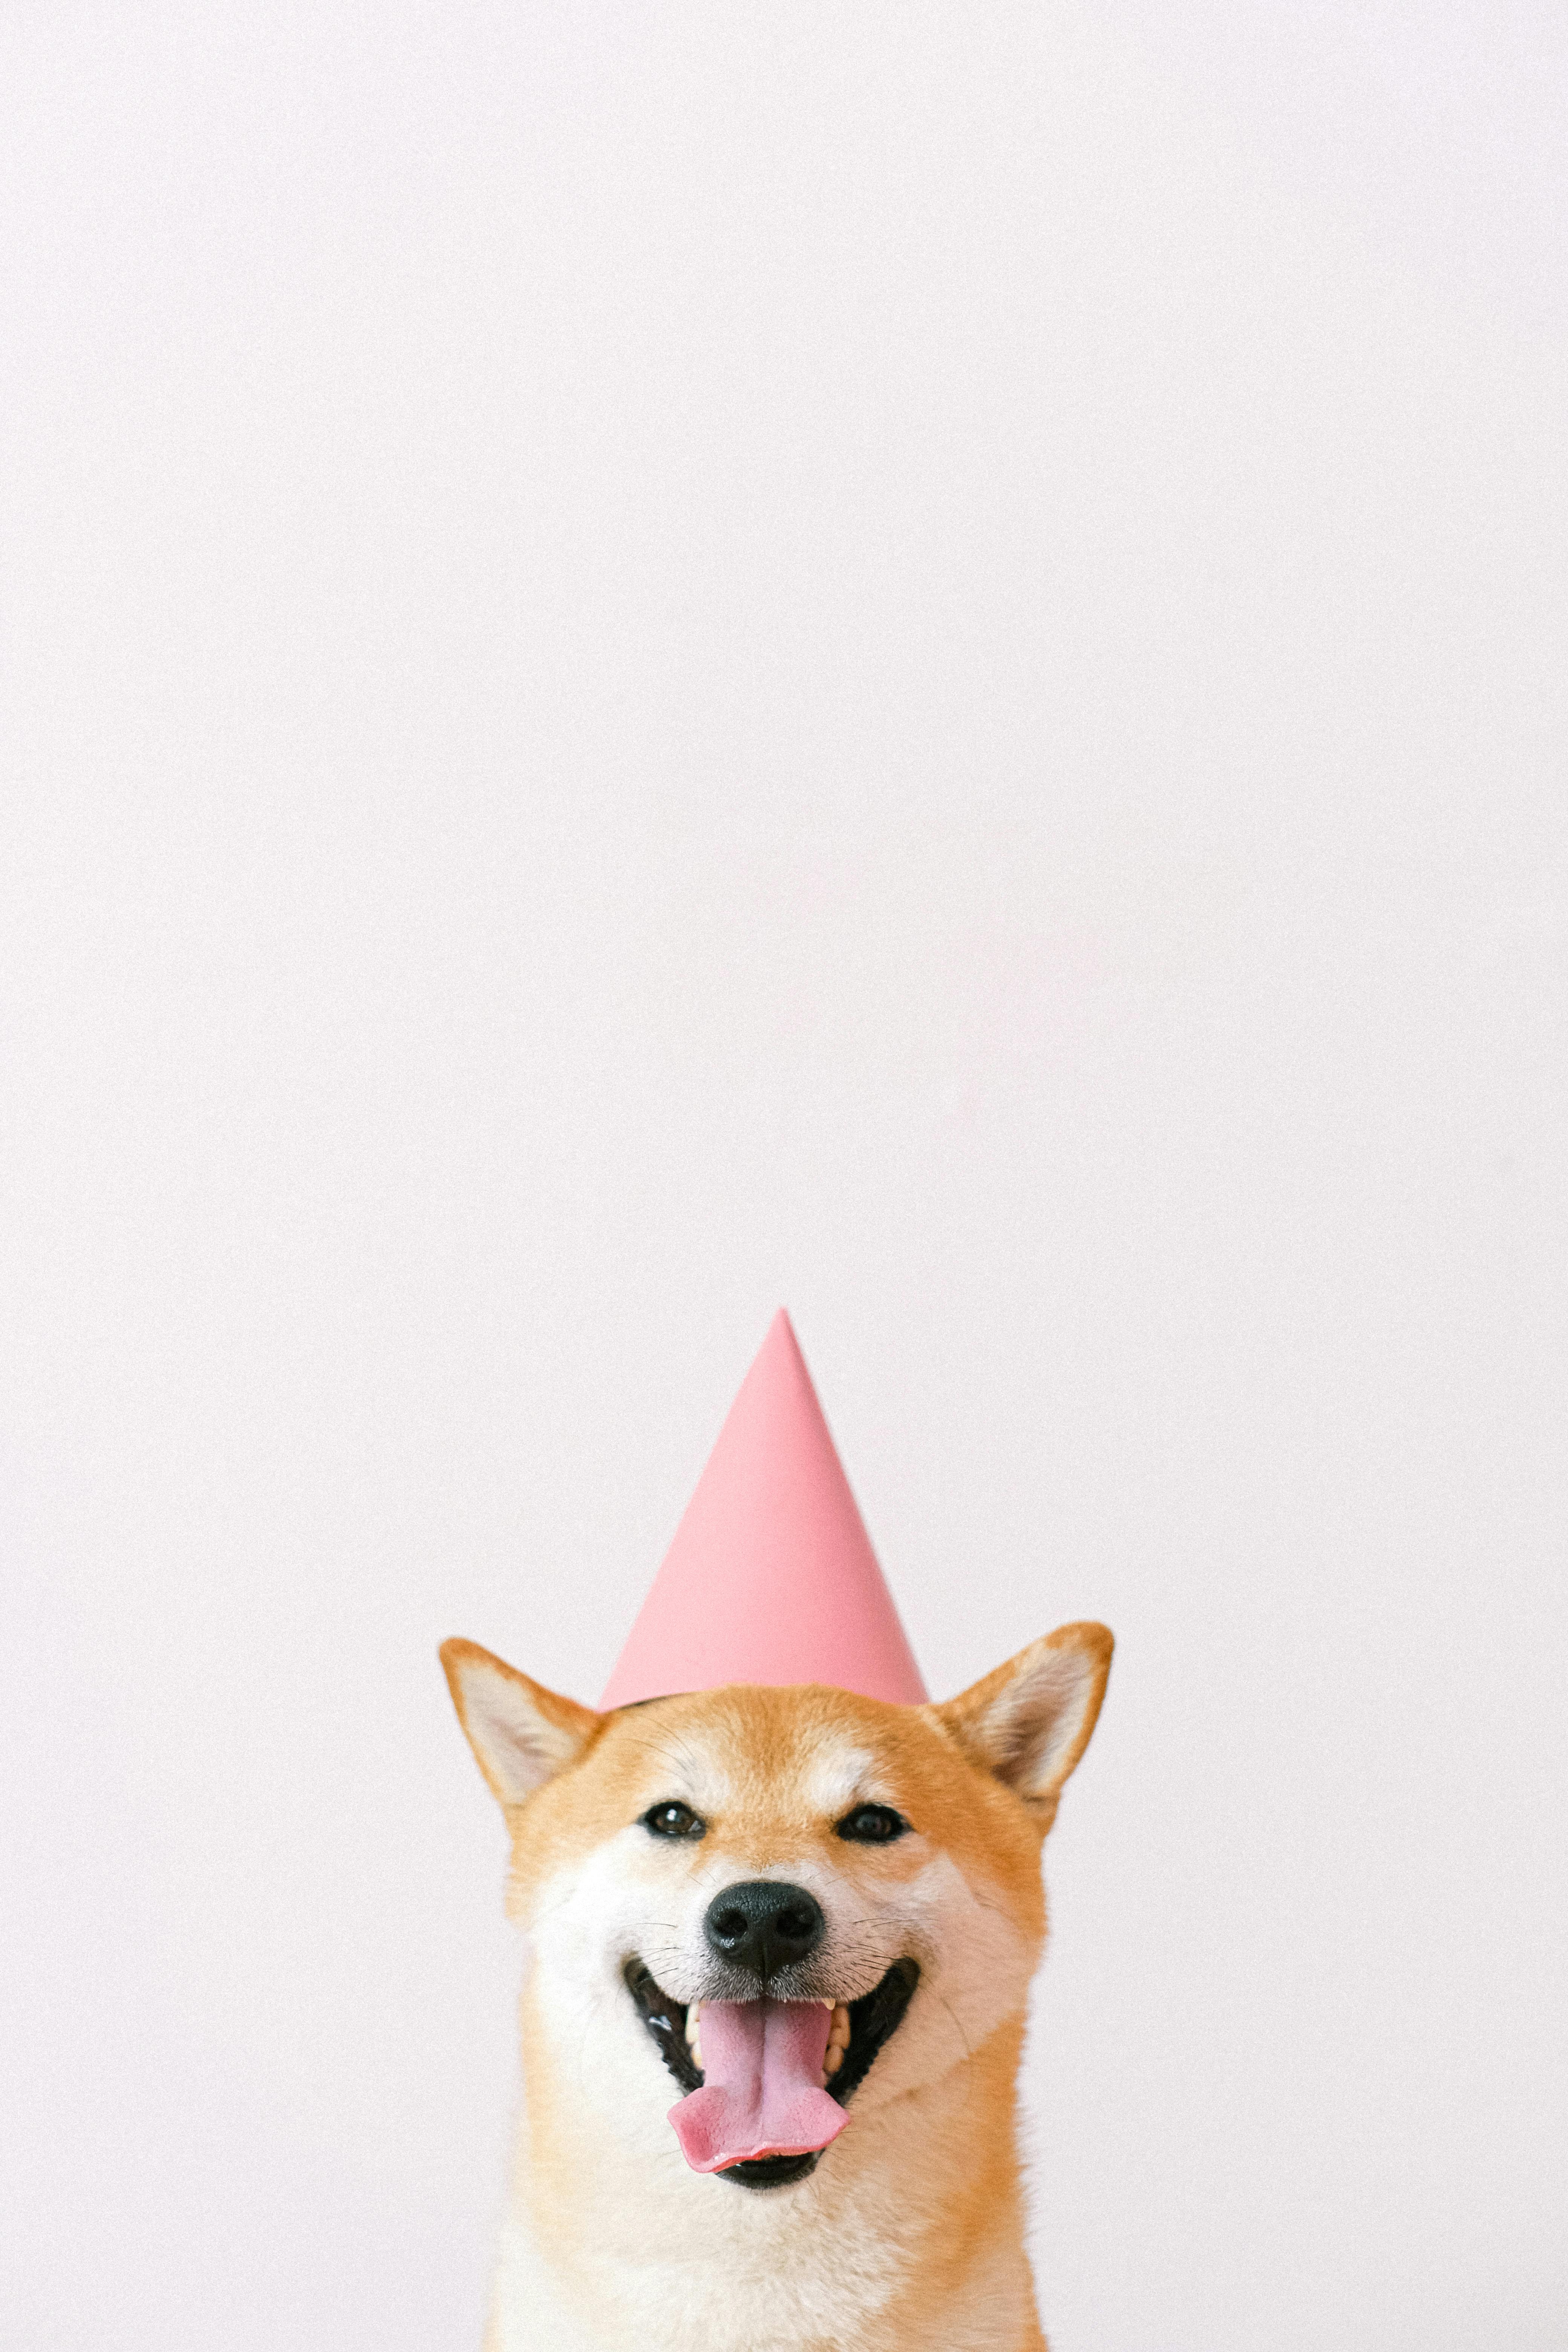 cute dog wearing a party hat